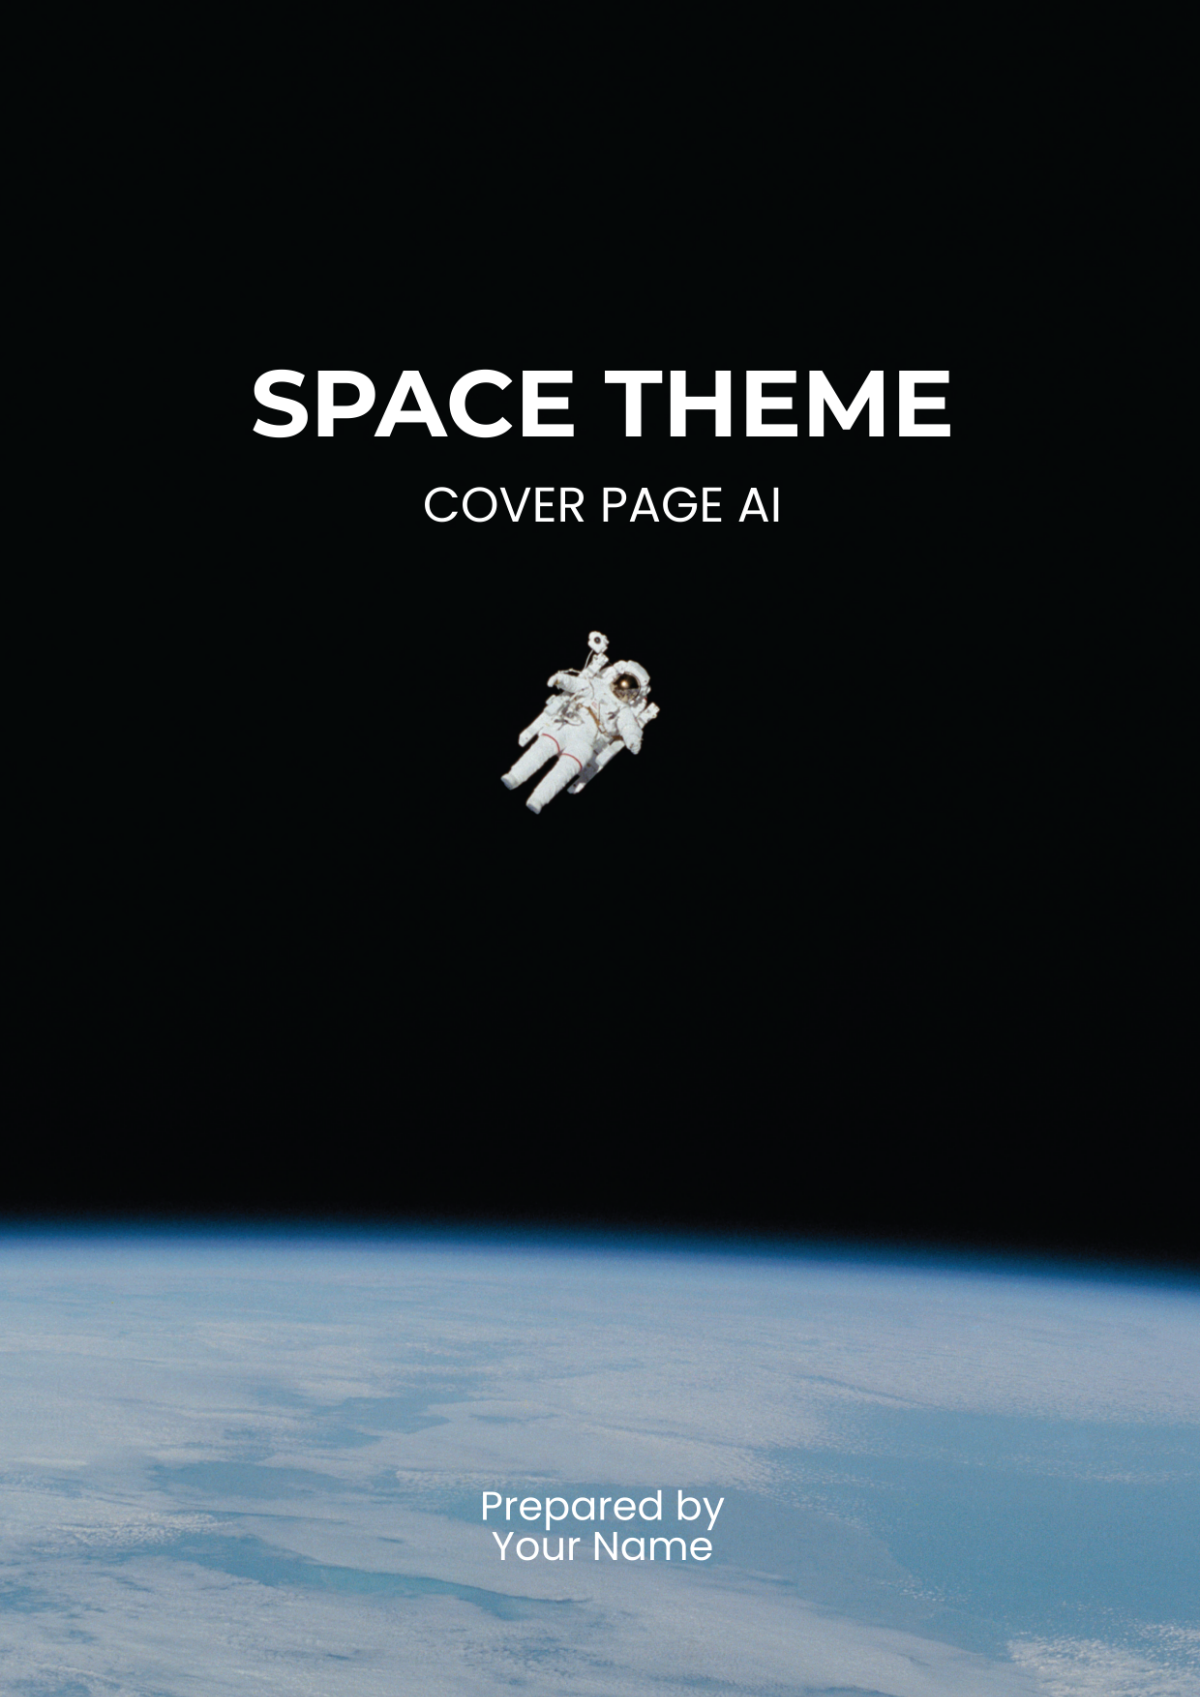 Space Theme Cover Page AI Template